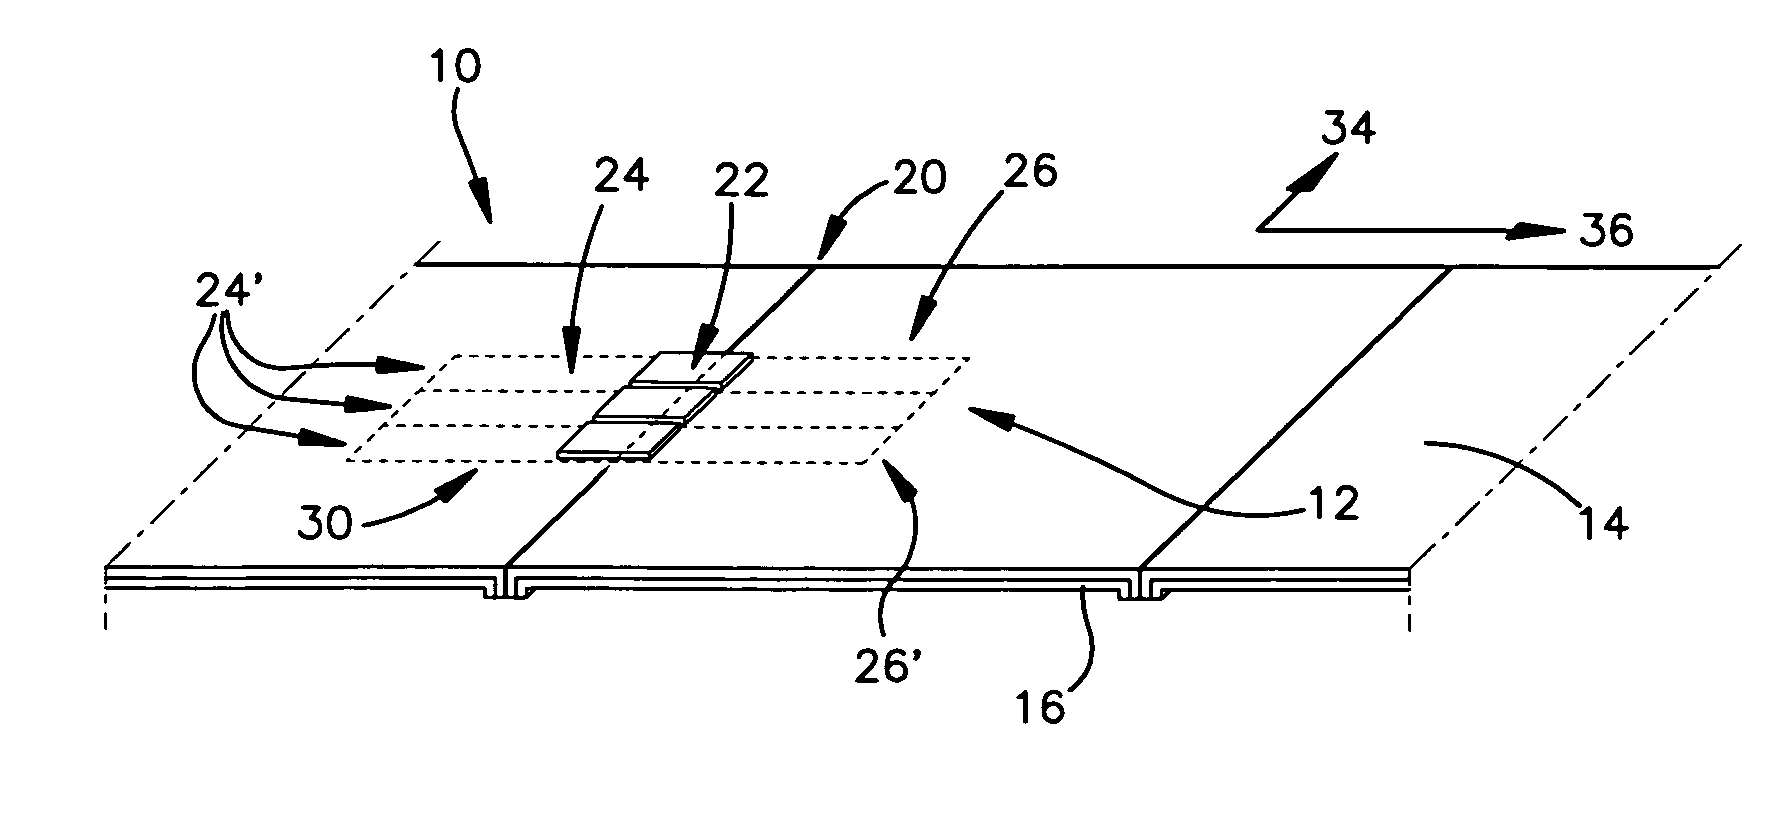 Low cost method of producing radio frequency identification tags with straps without antenna patterning